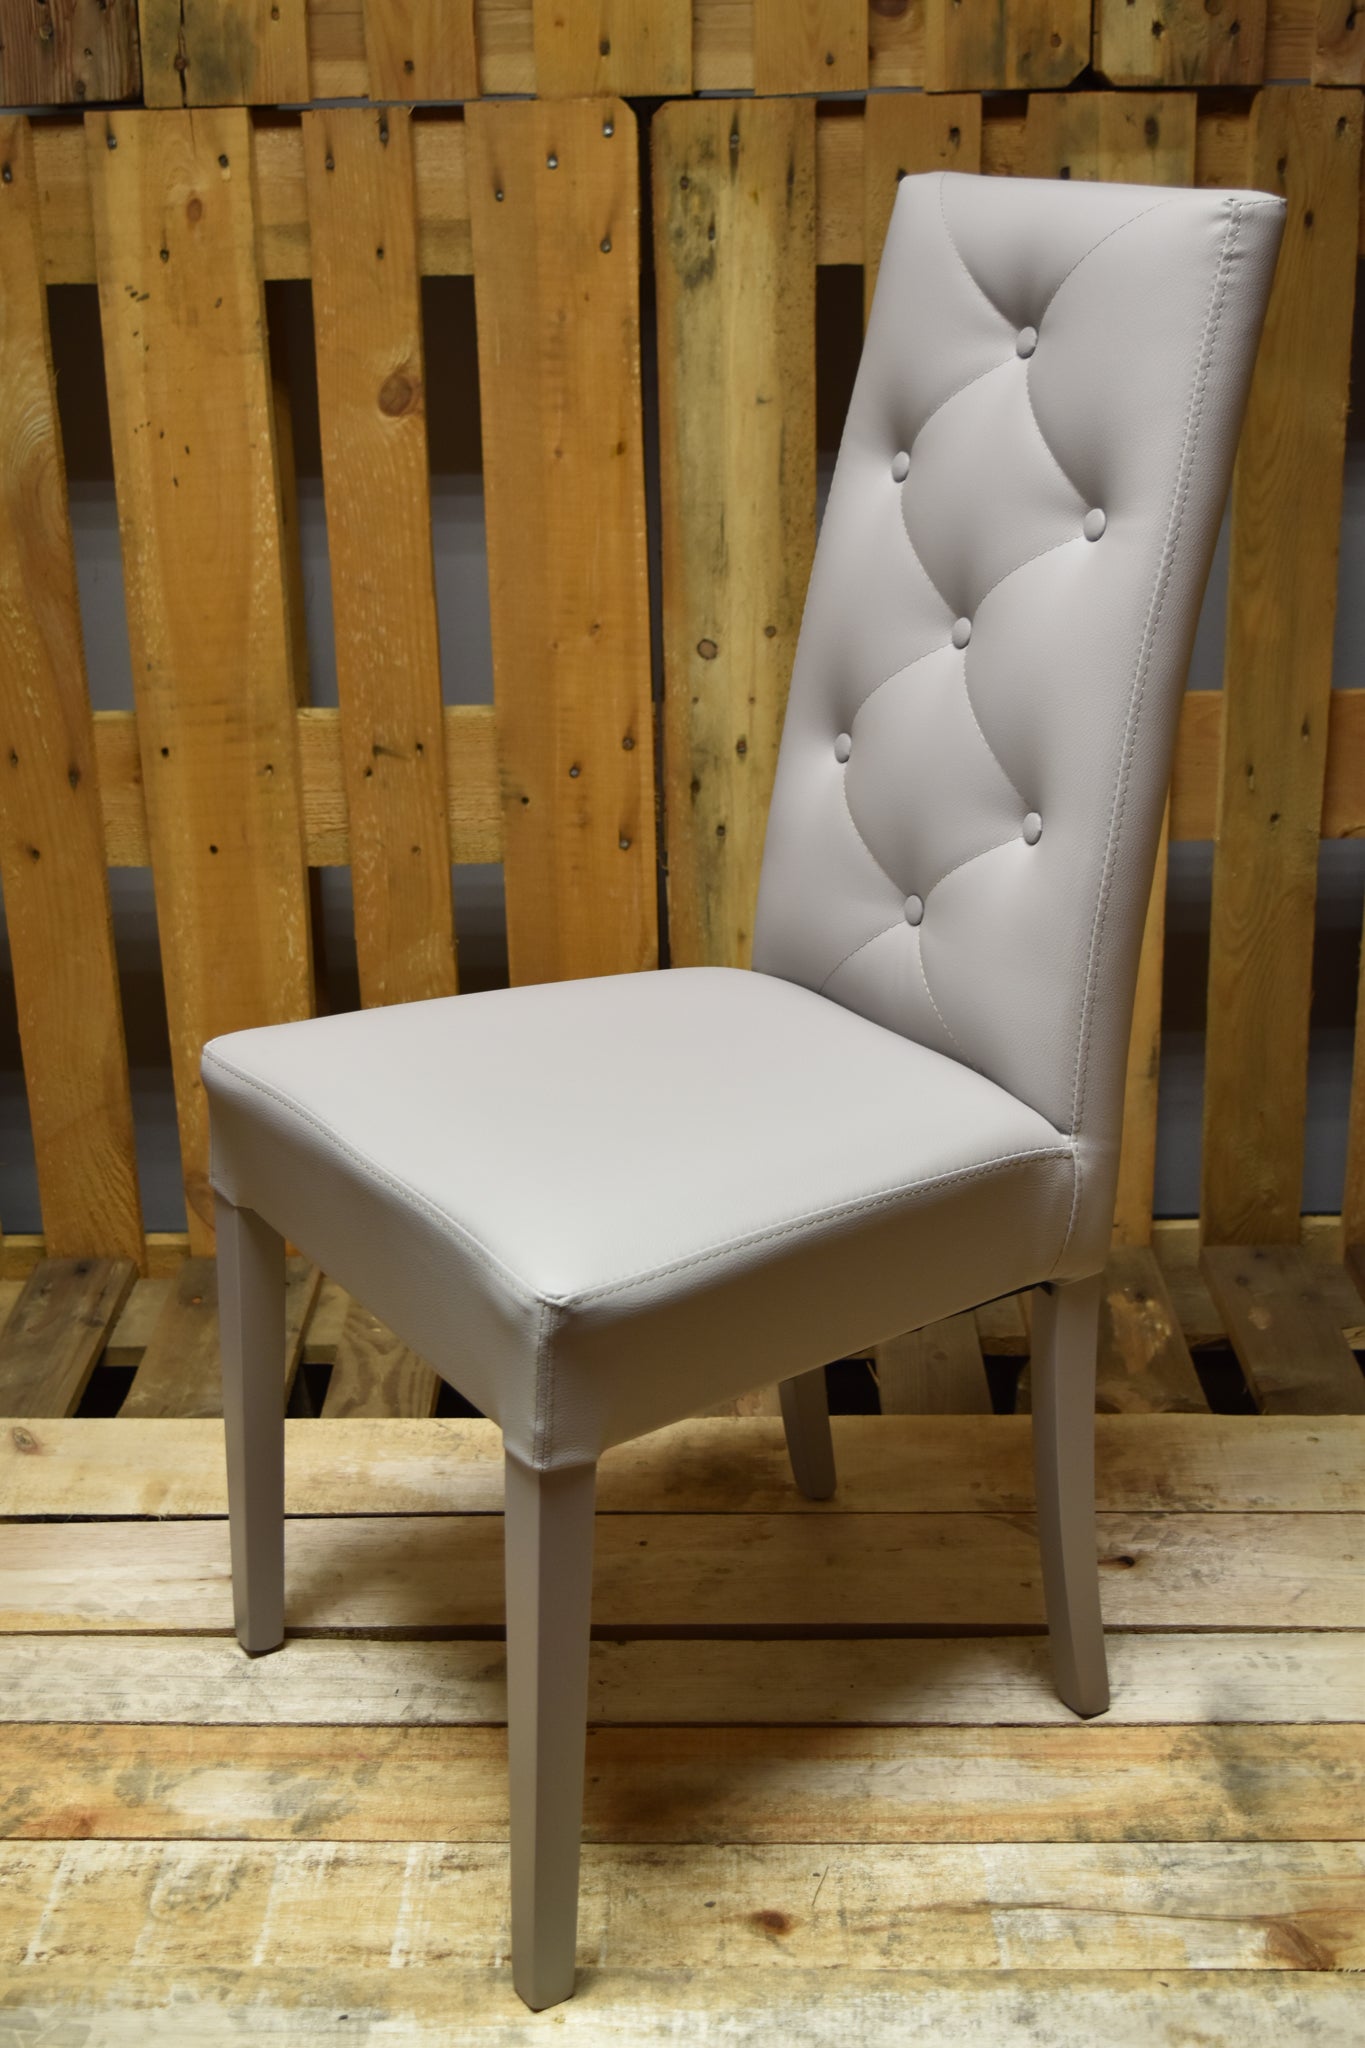 Stock model 35 padded chairs in light grey